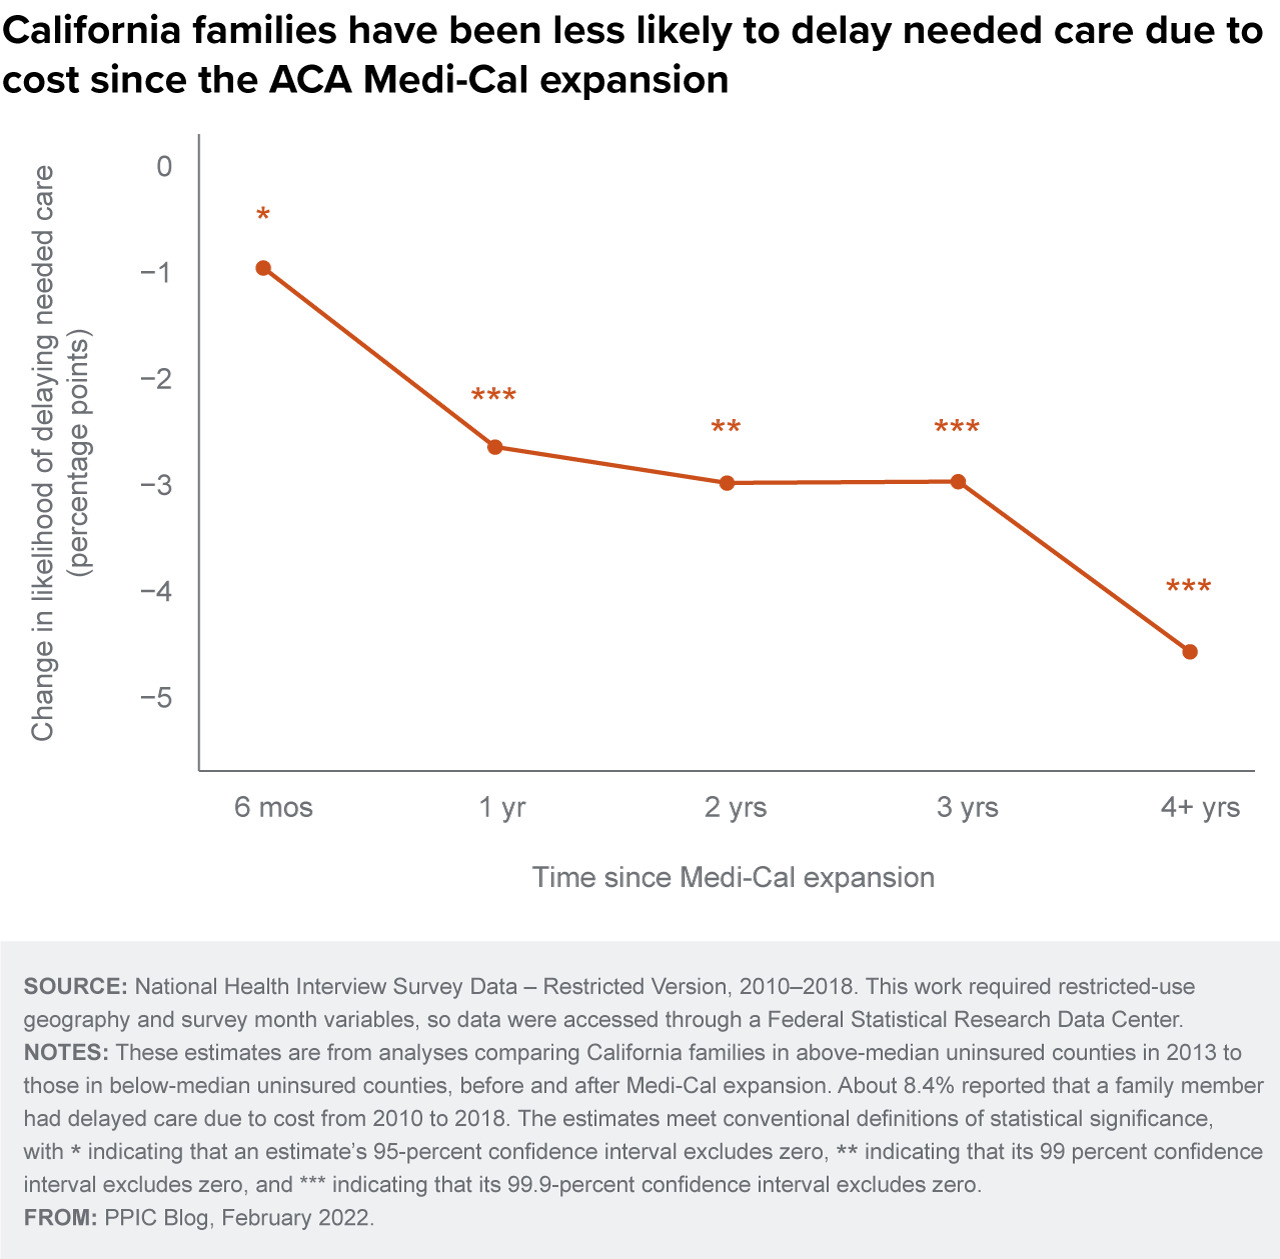 figure - California families have been less likely to delay needed care due to cost since the ACA Medi-Cal expansion